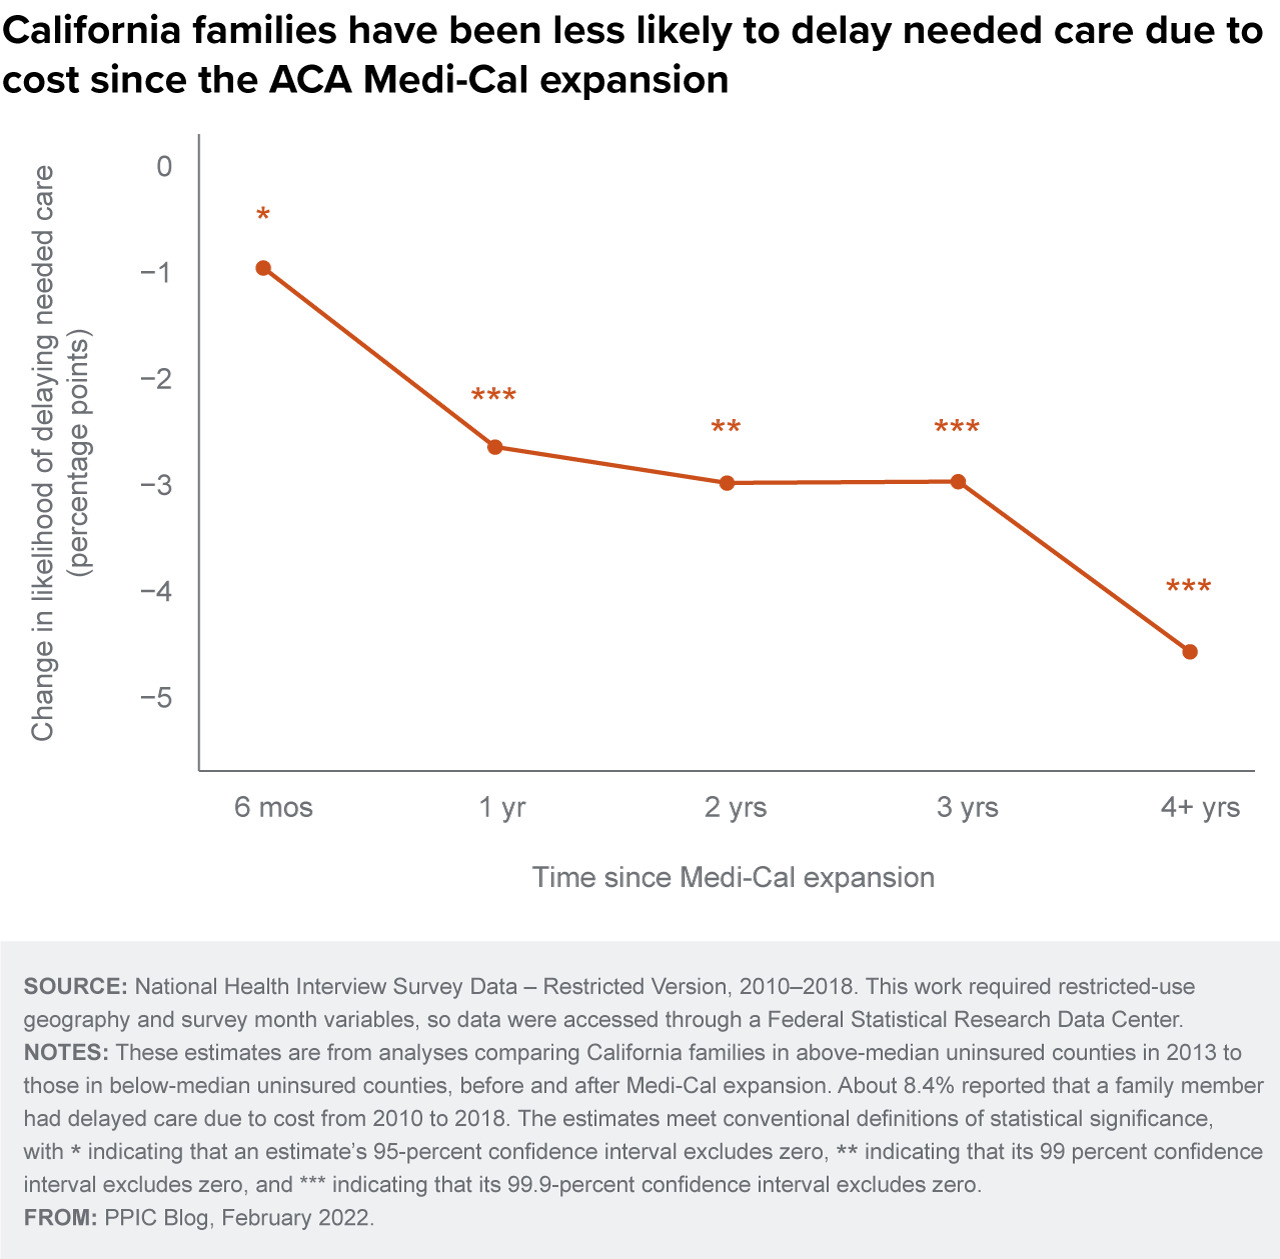 figure - California families have been less likely to delay needed care due to cost since the ACA Medi-Cal expansion